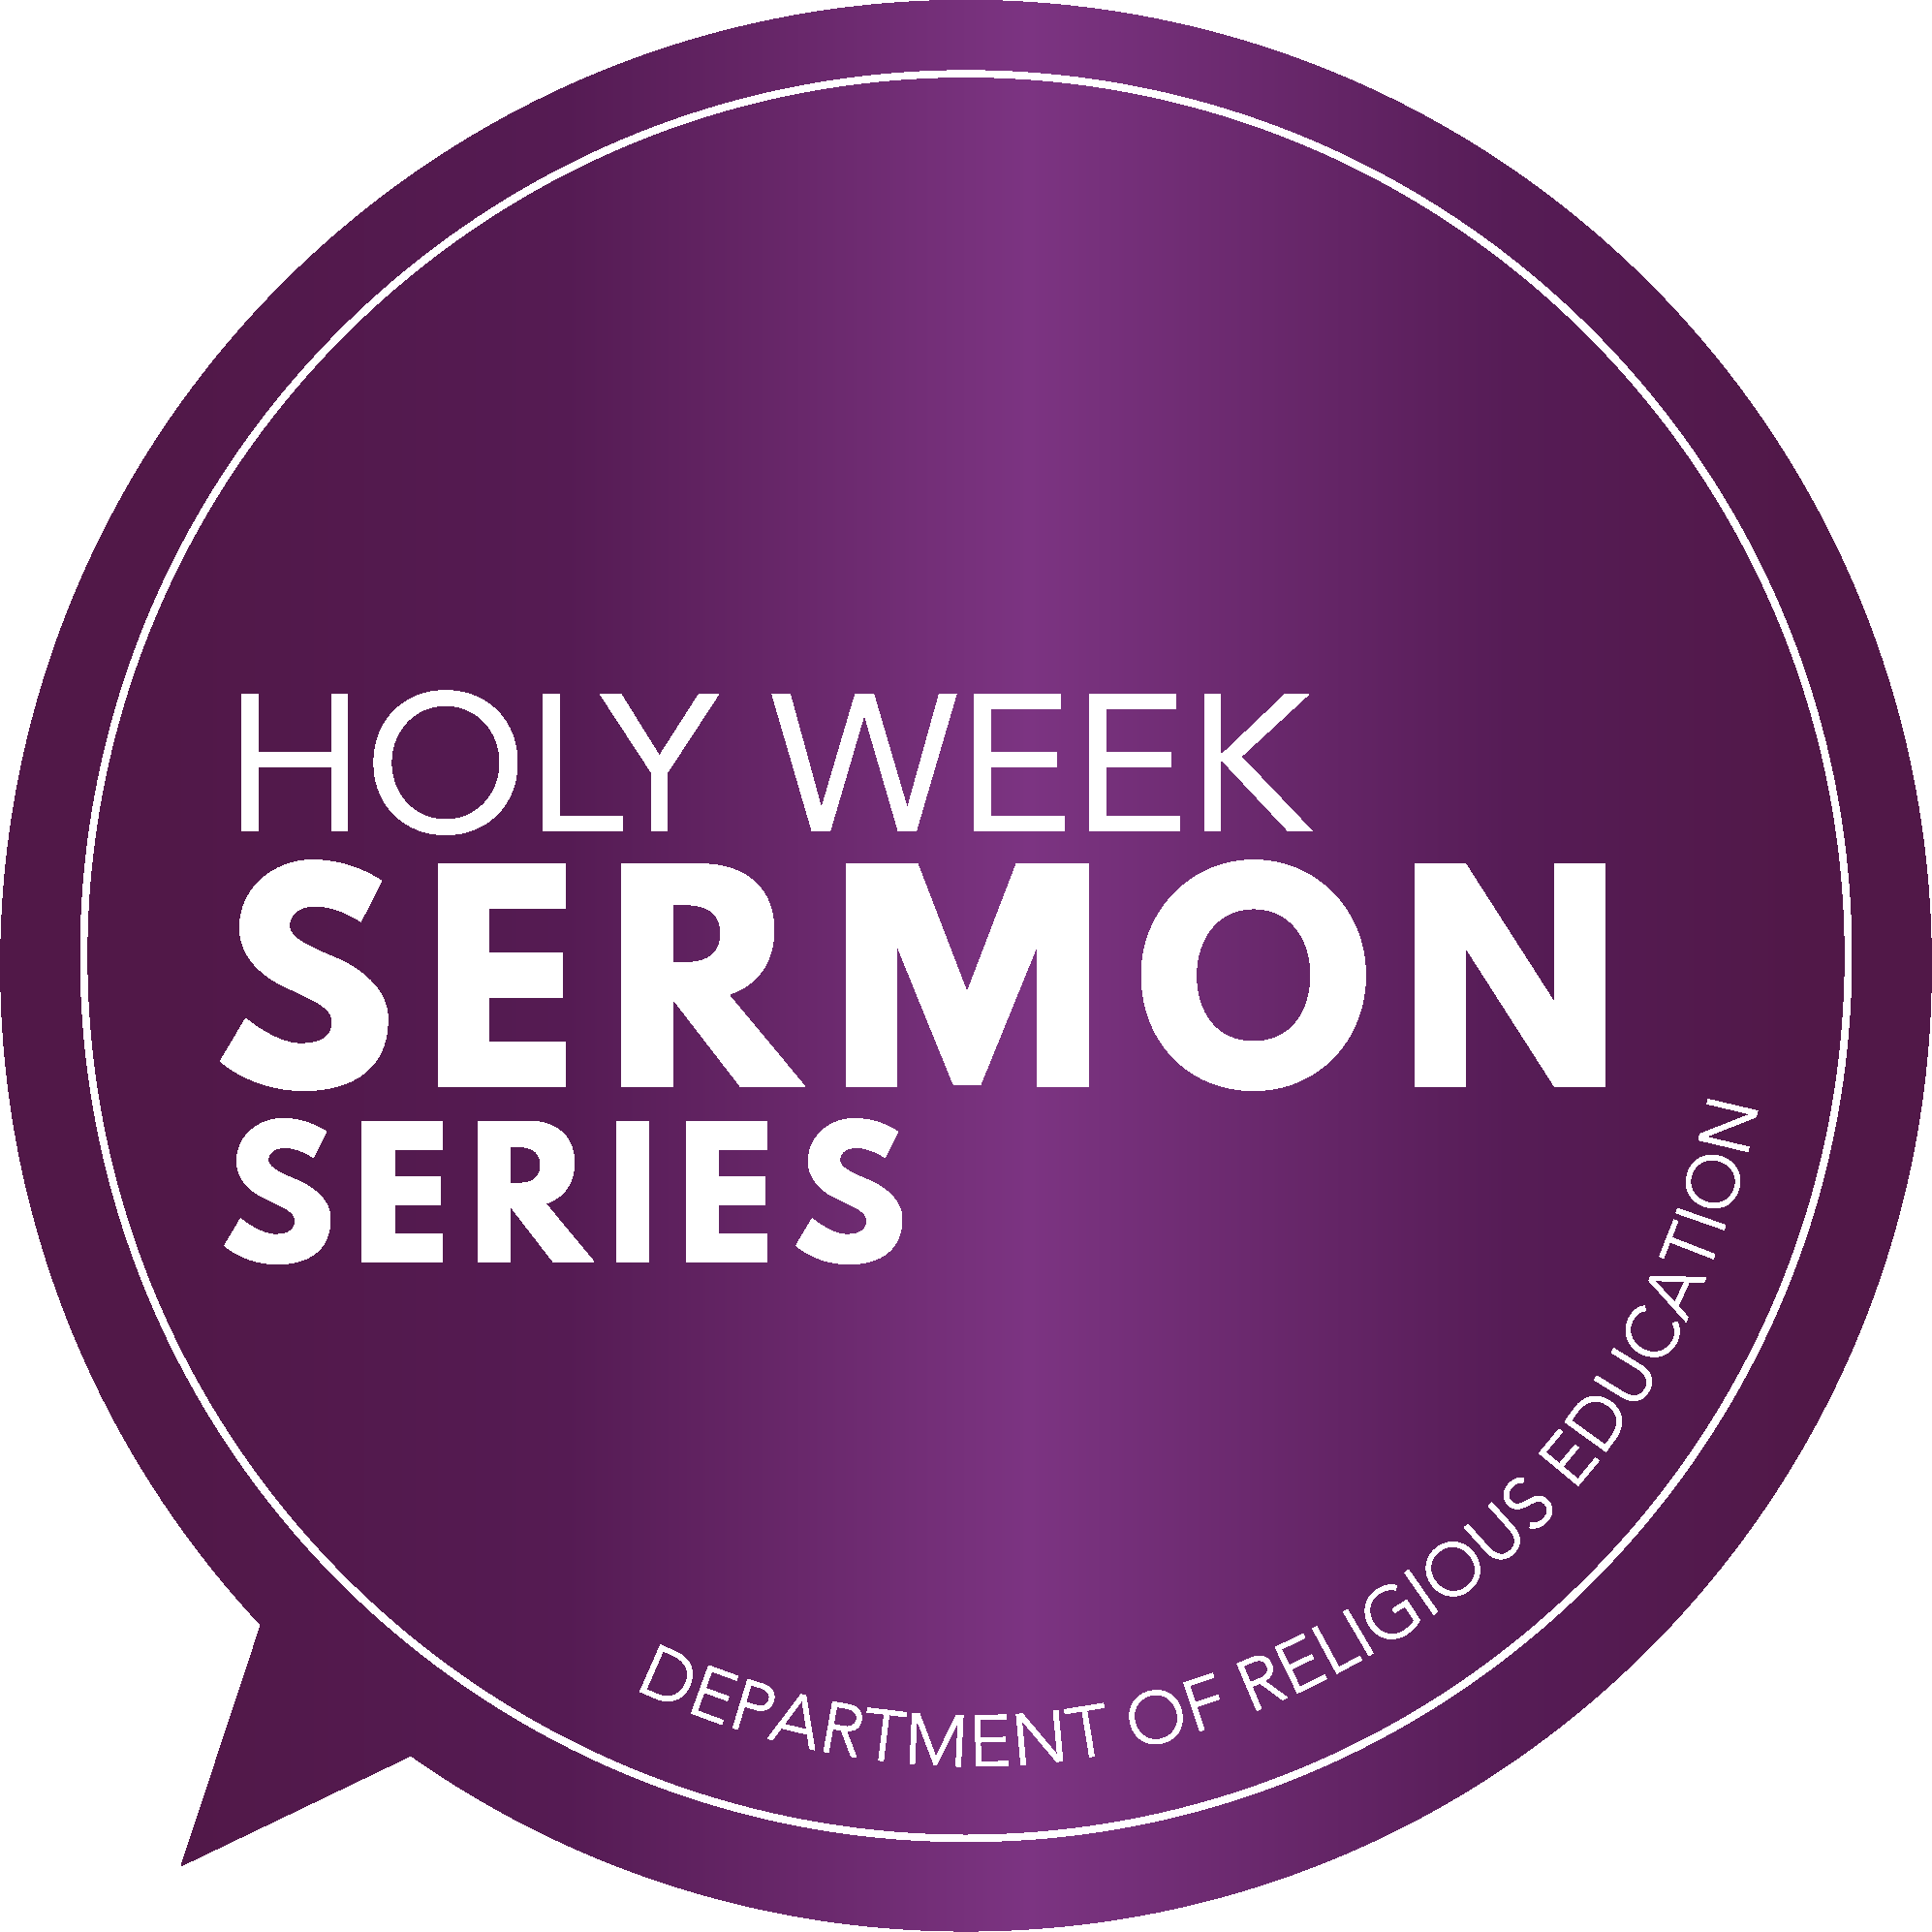 MISSED US? THE DRE HOLY WEEK SERMON SERIES IS BACK FOR THE WEEK!